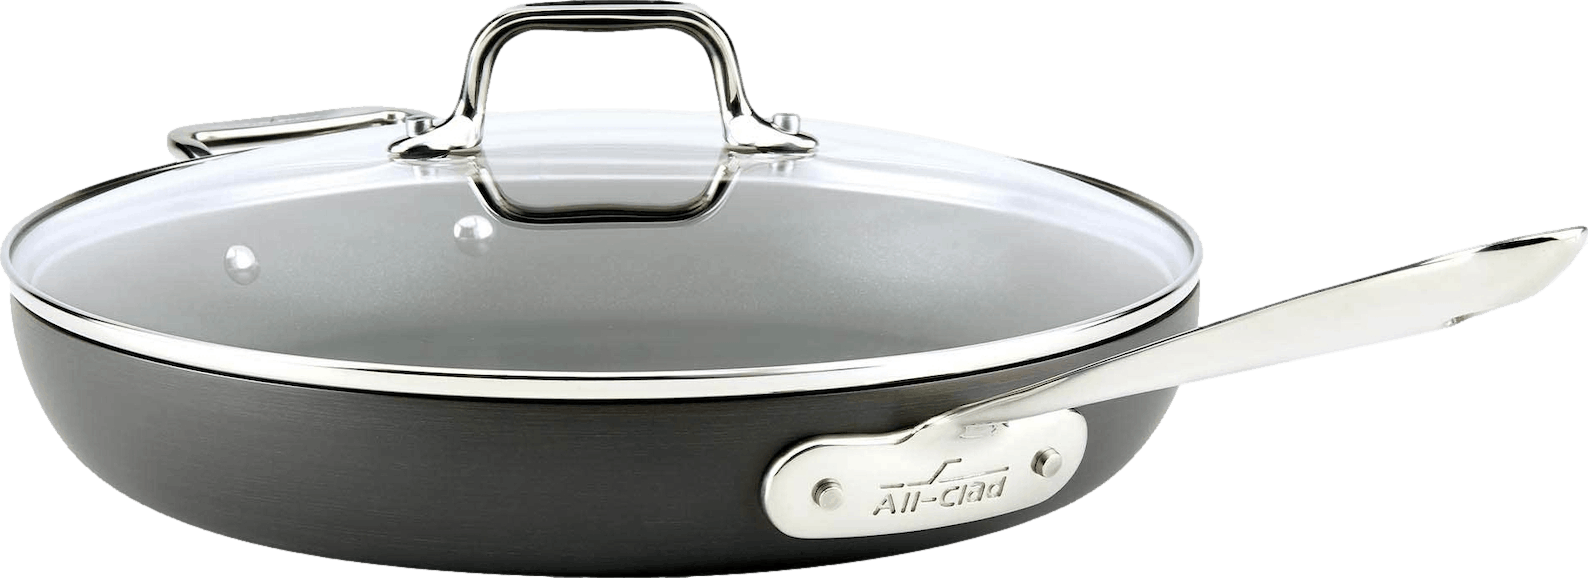 All-Clad HA1 Hard Anodized Nonstick Cookware, Fry Pan with lid, 12